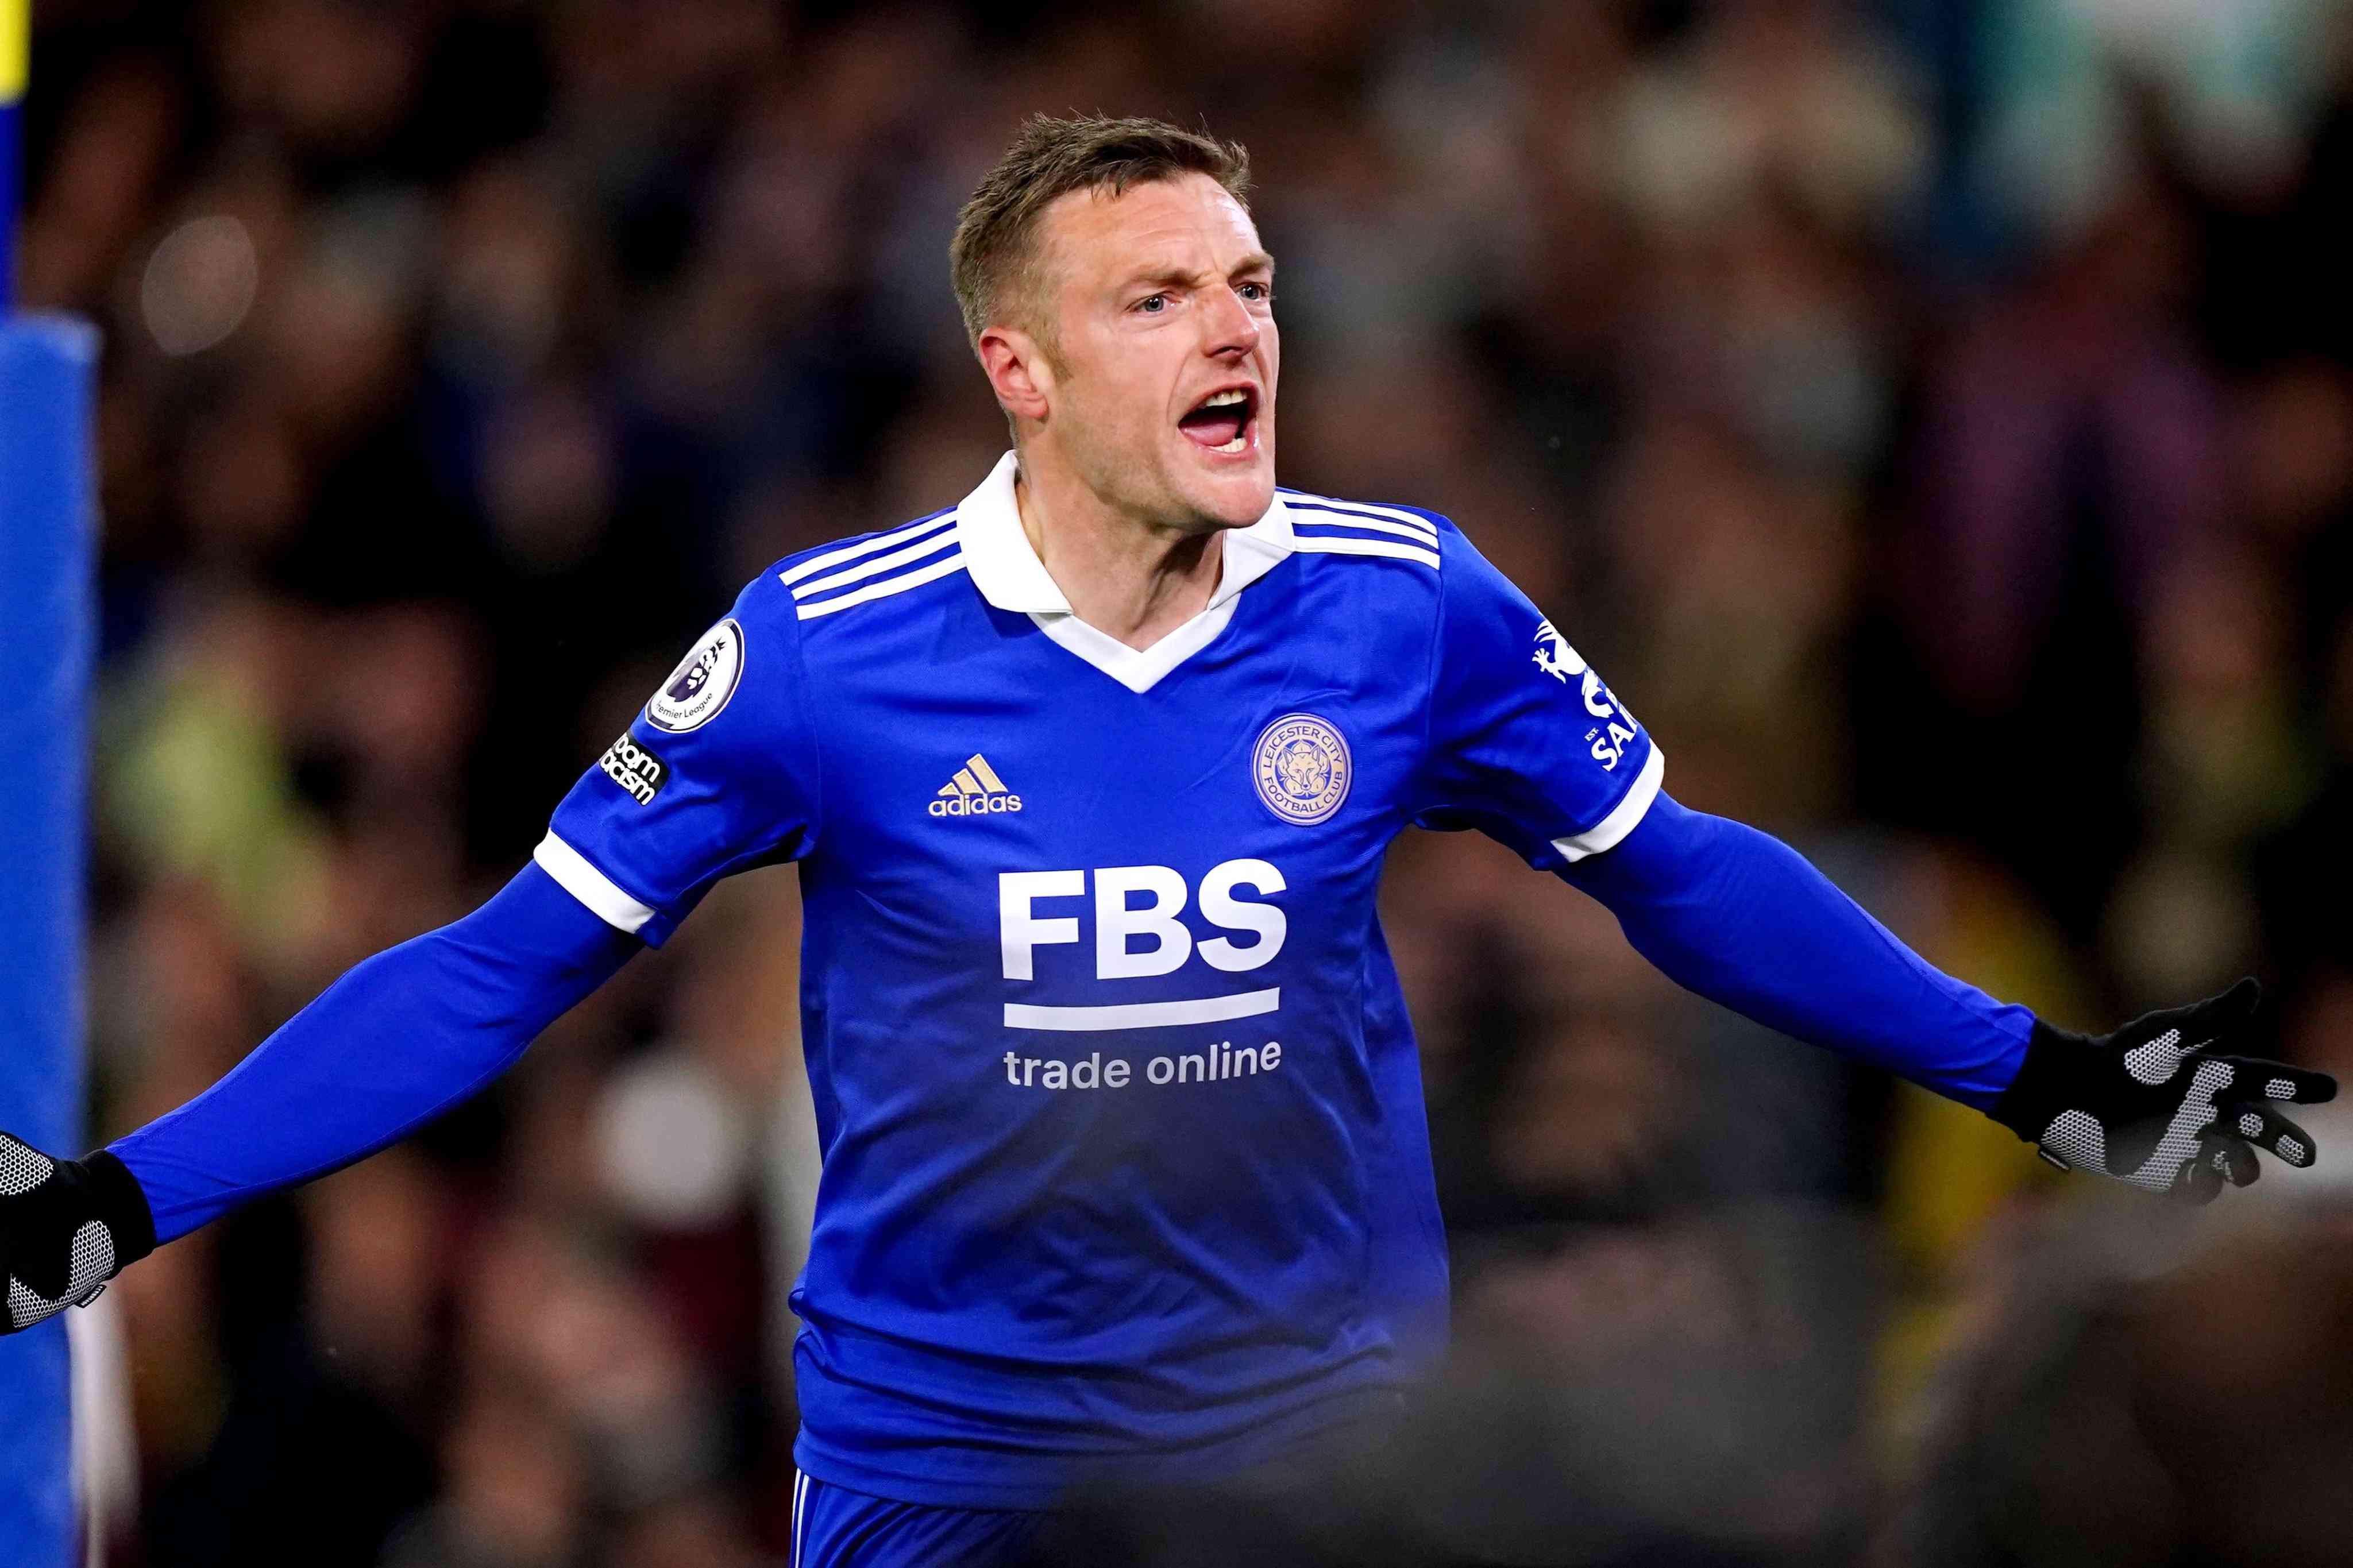 Vardy leads Leicester to Championship title, Premier League promotion